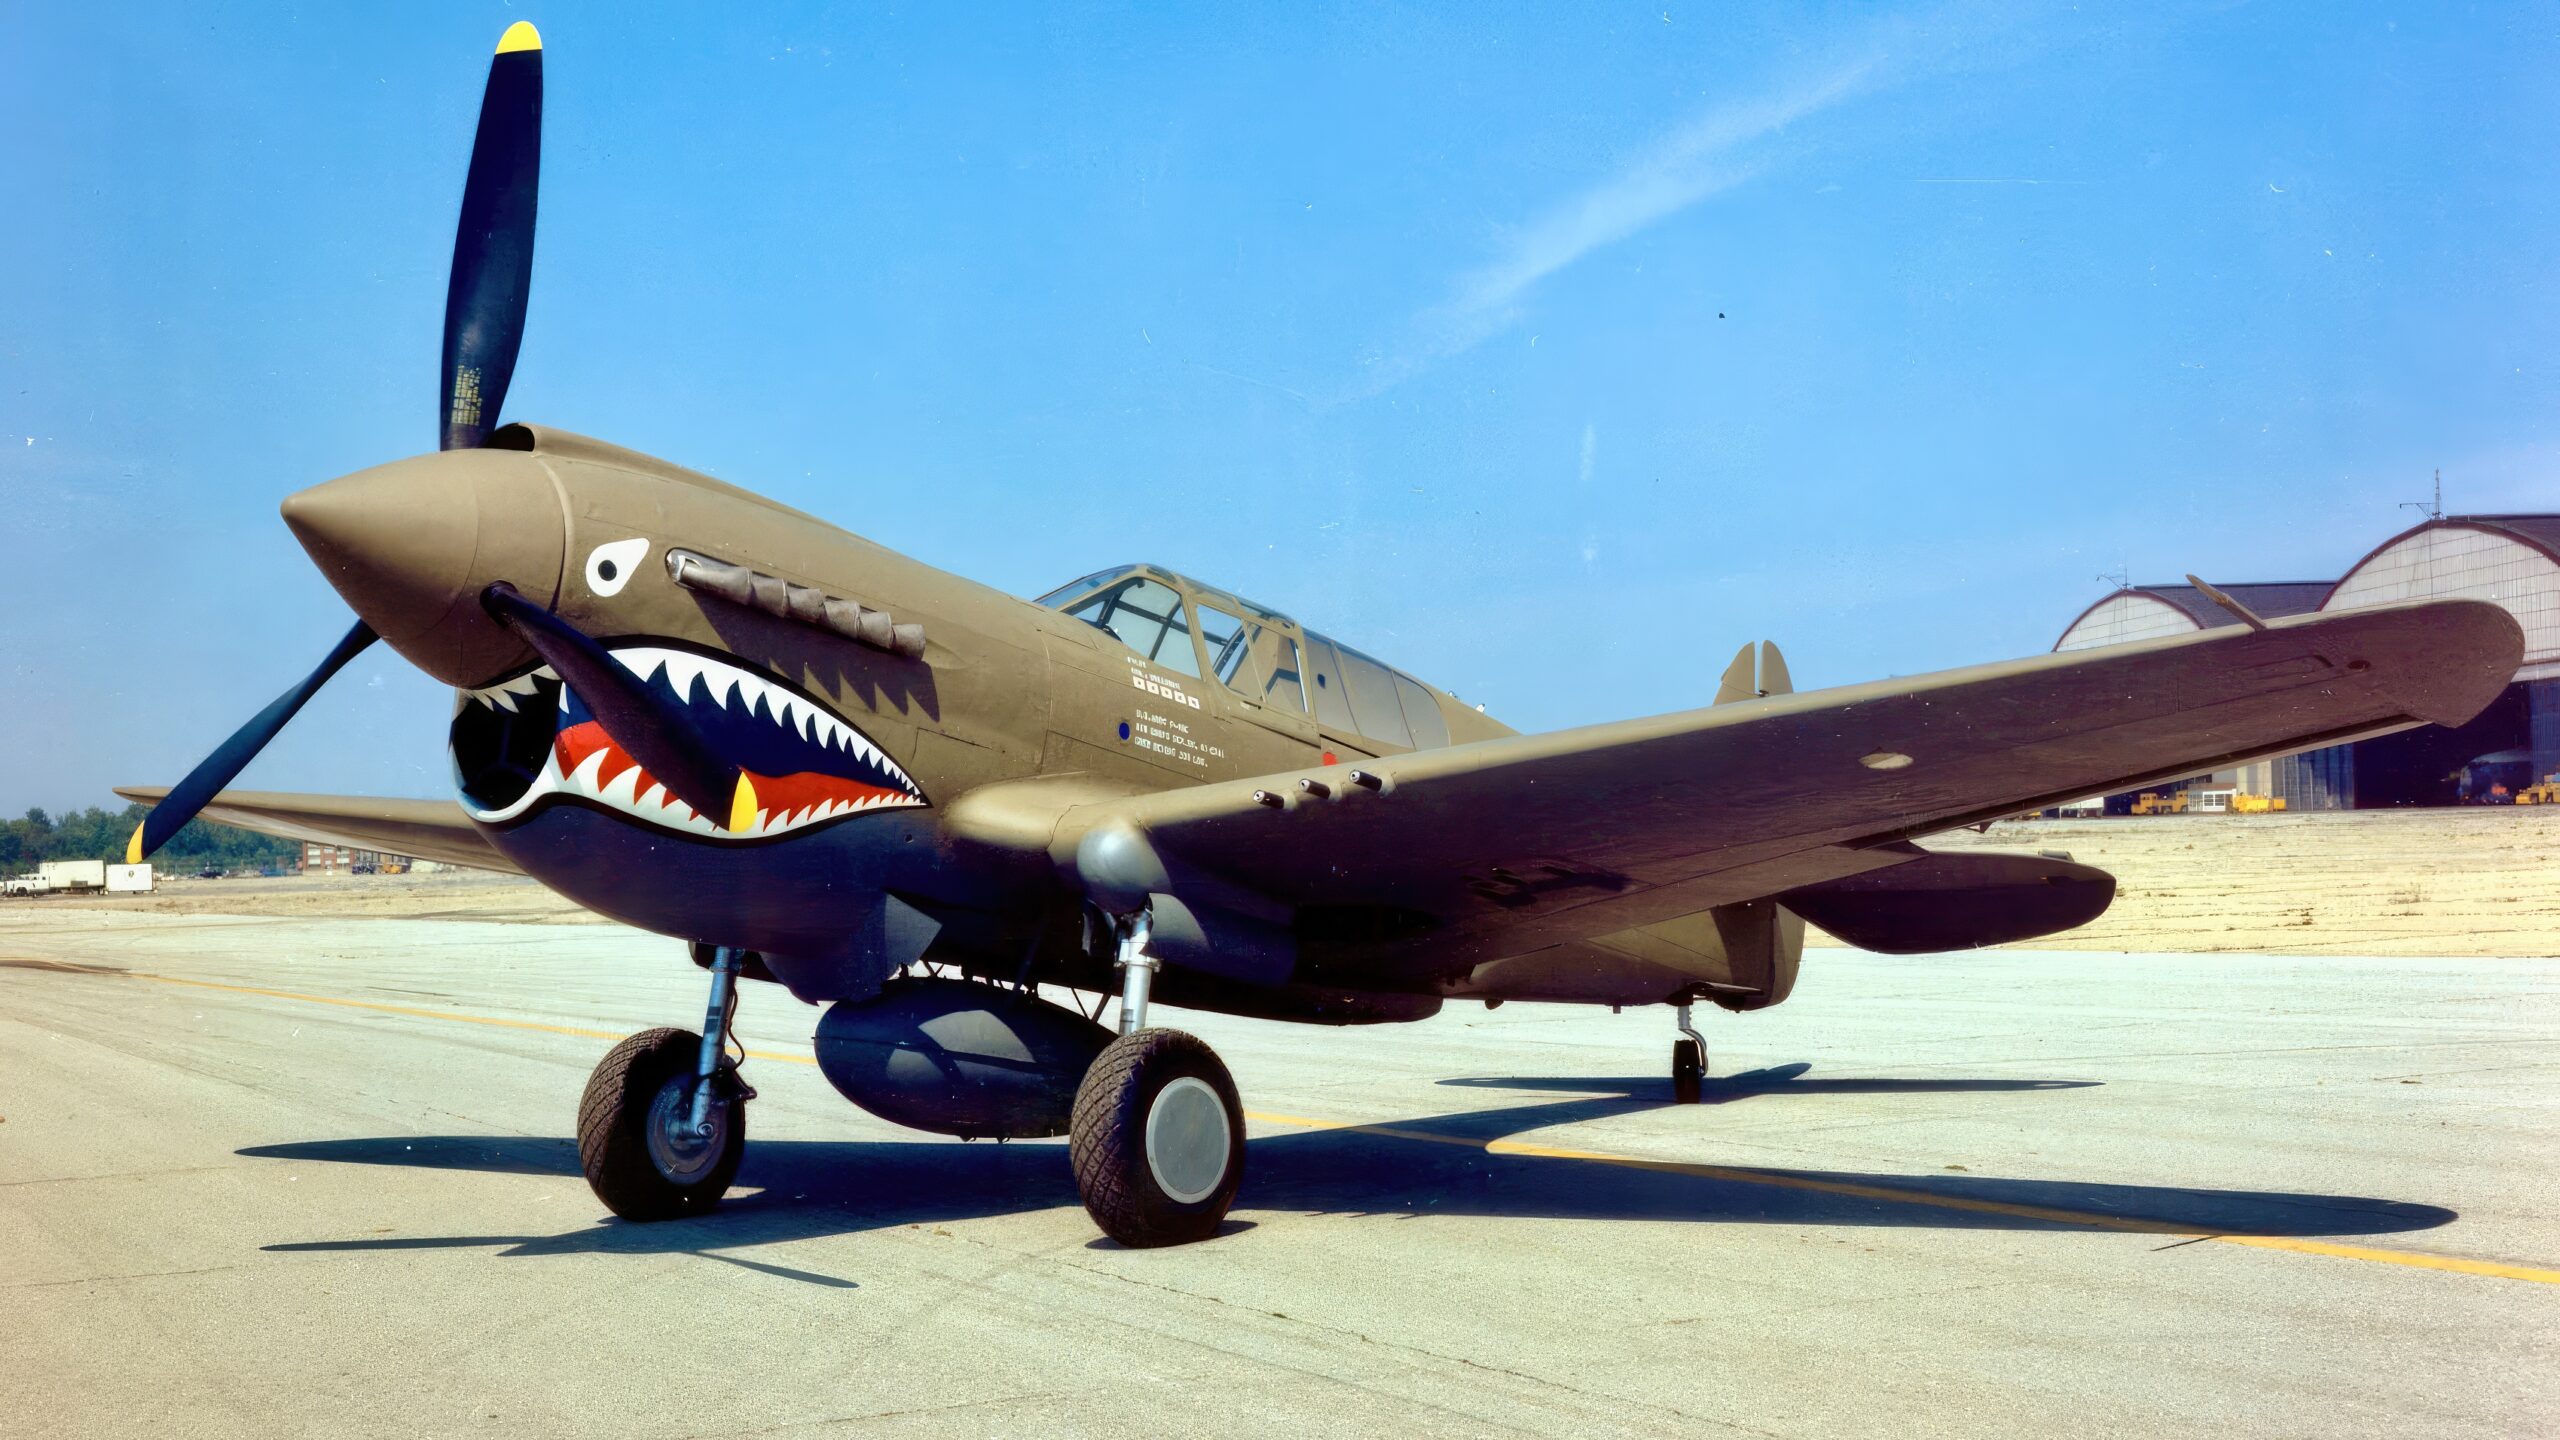 Curtiss P-40 Warhawk at the National Museum of the United States Air Force